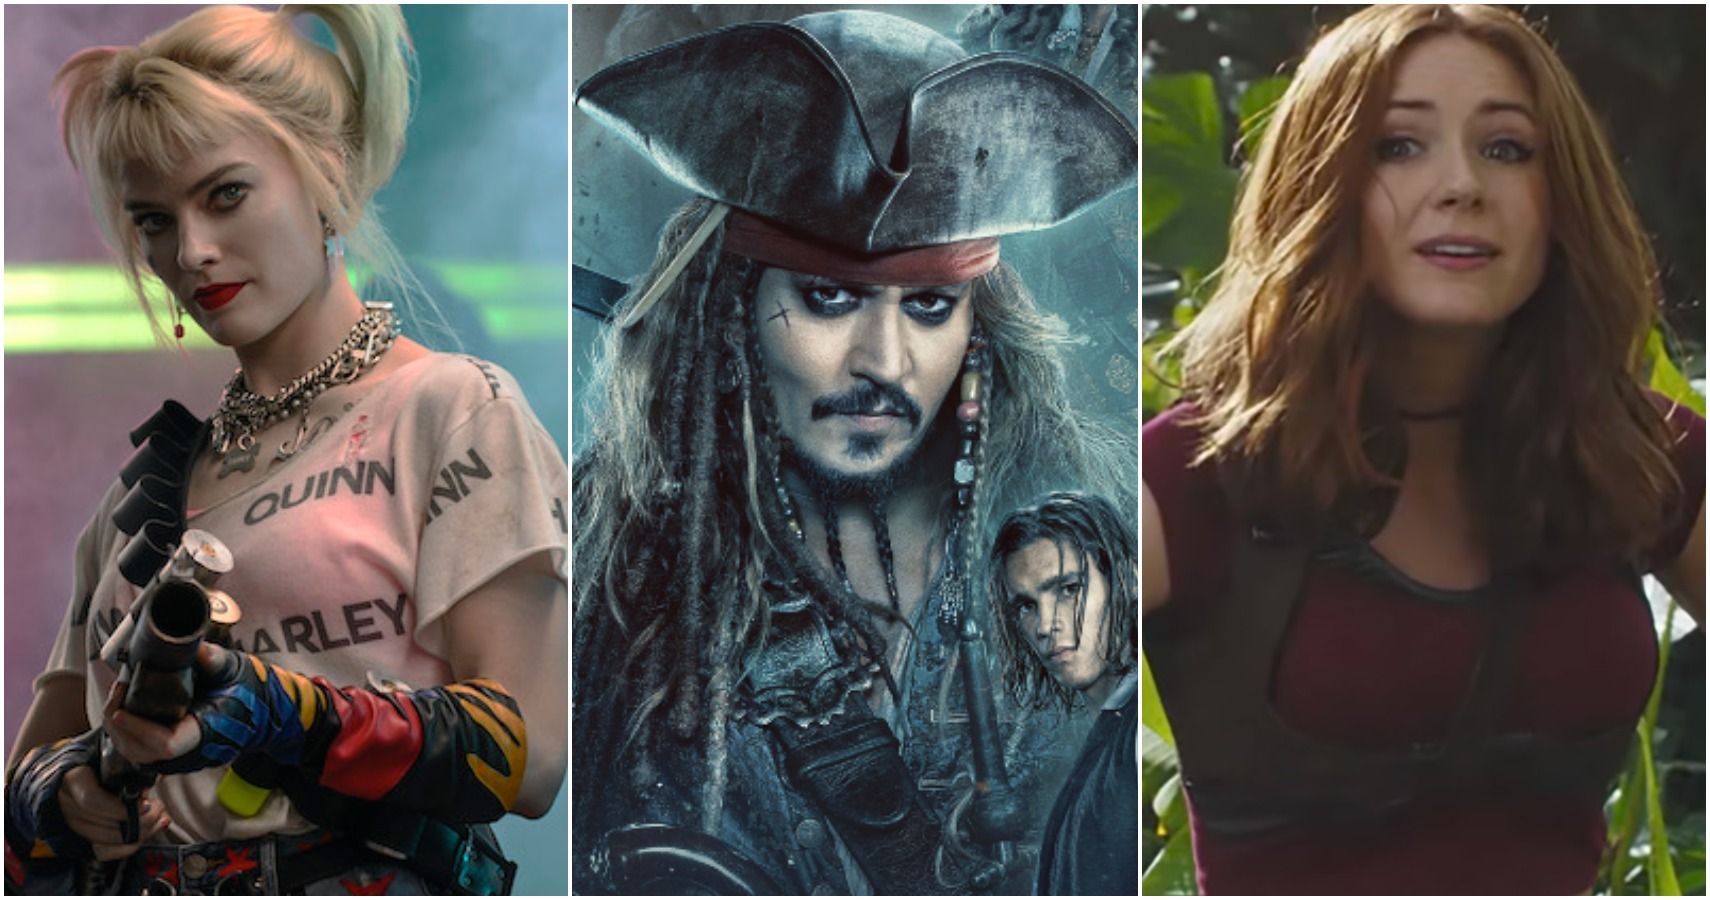 5 Reasons The New Pirates Of The Caribbean Reboot Will Work (& 5 It Won't)